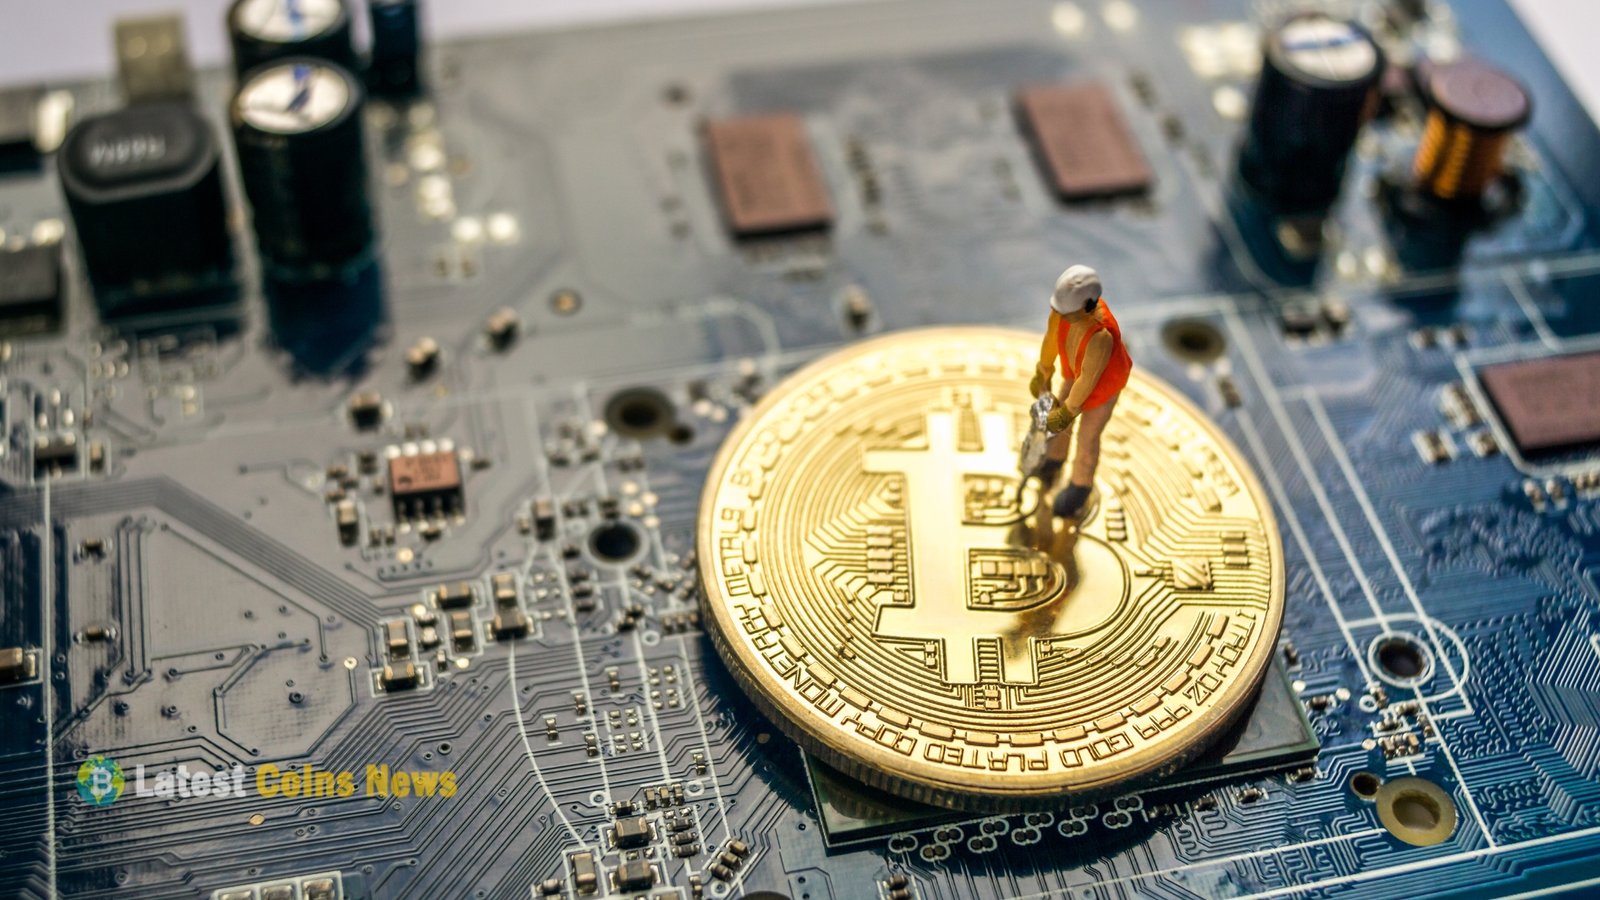 Bitcoin miners diversifying into AI expect billions